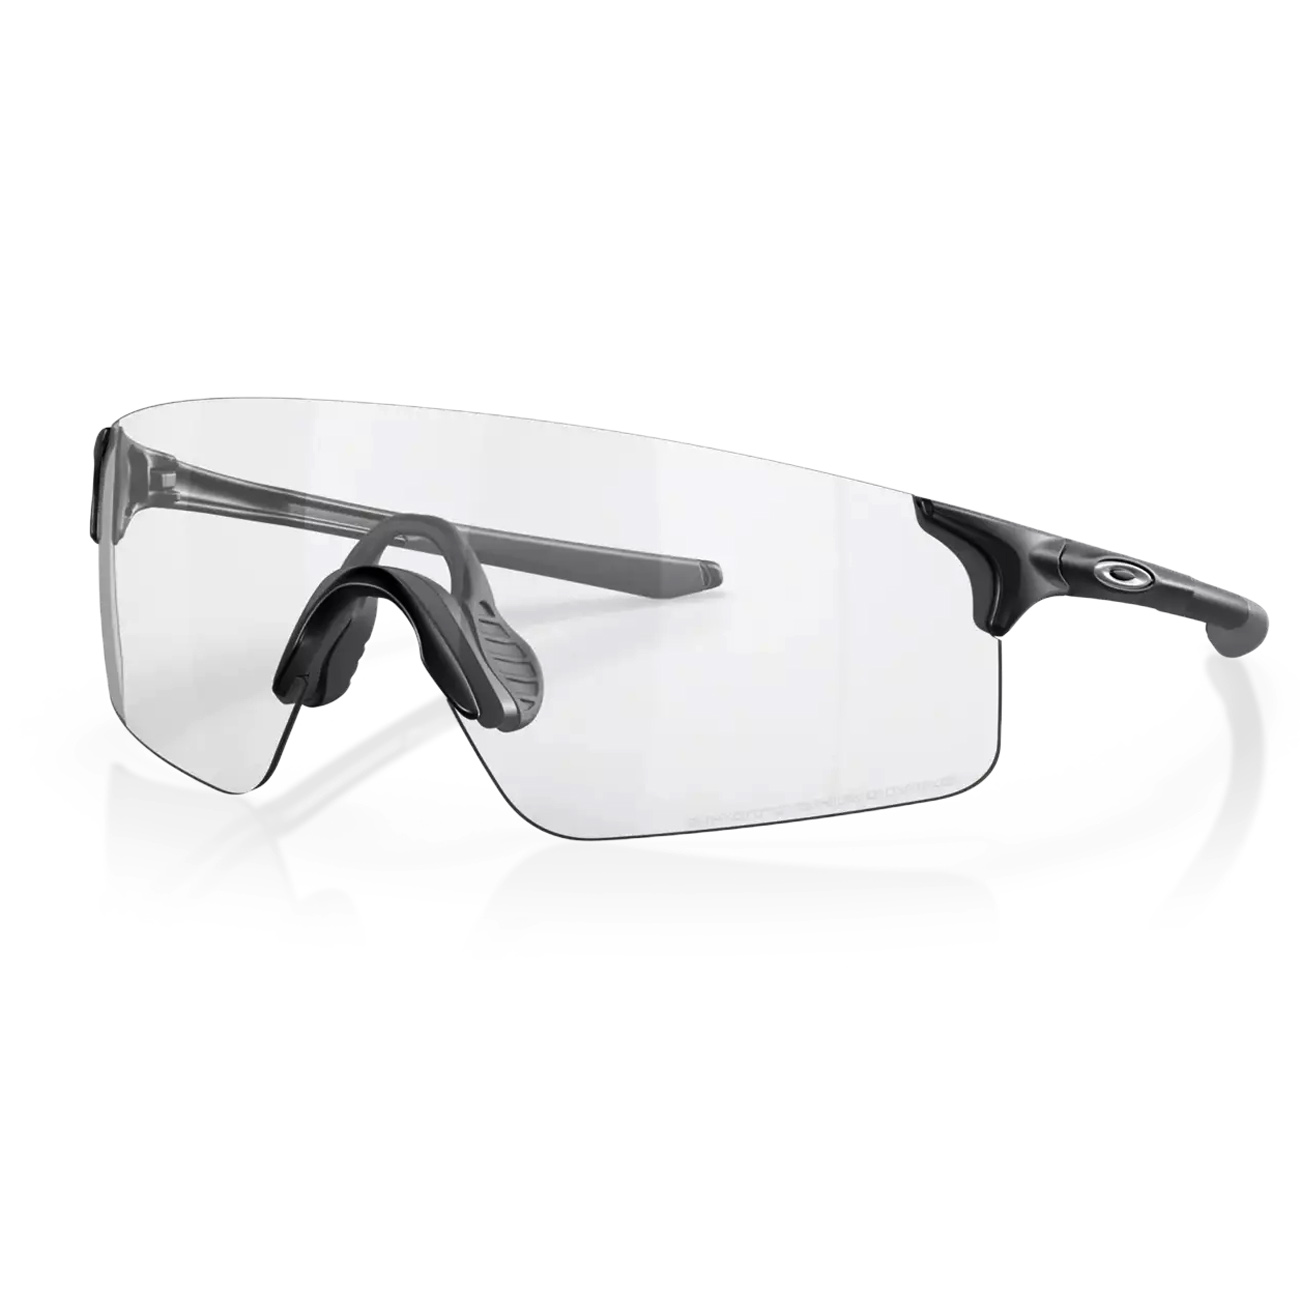 Picture of Oakley EVZero Blades Glasses - Matte Black/Clear-Black Photochromic - OO9454-0938